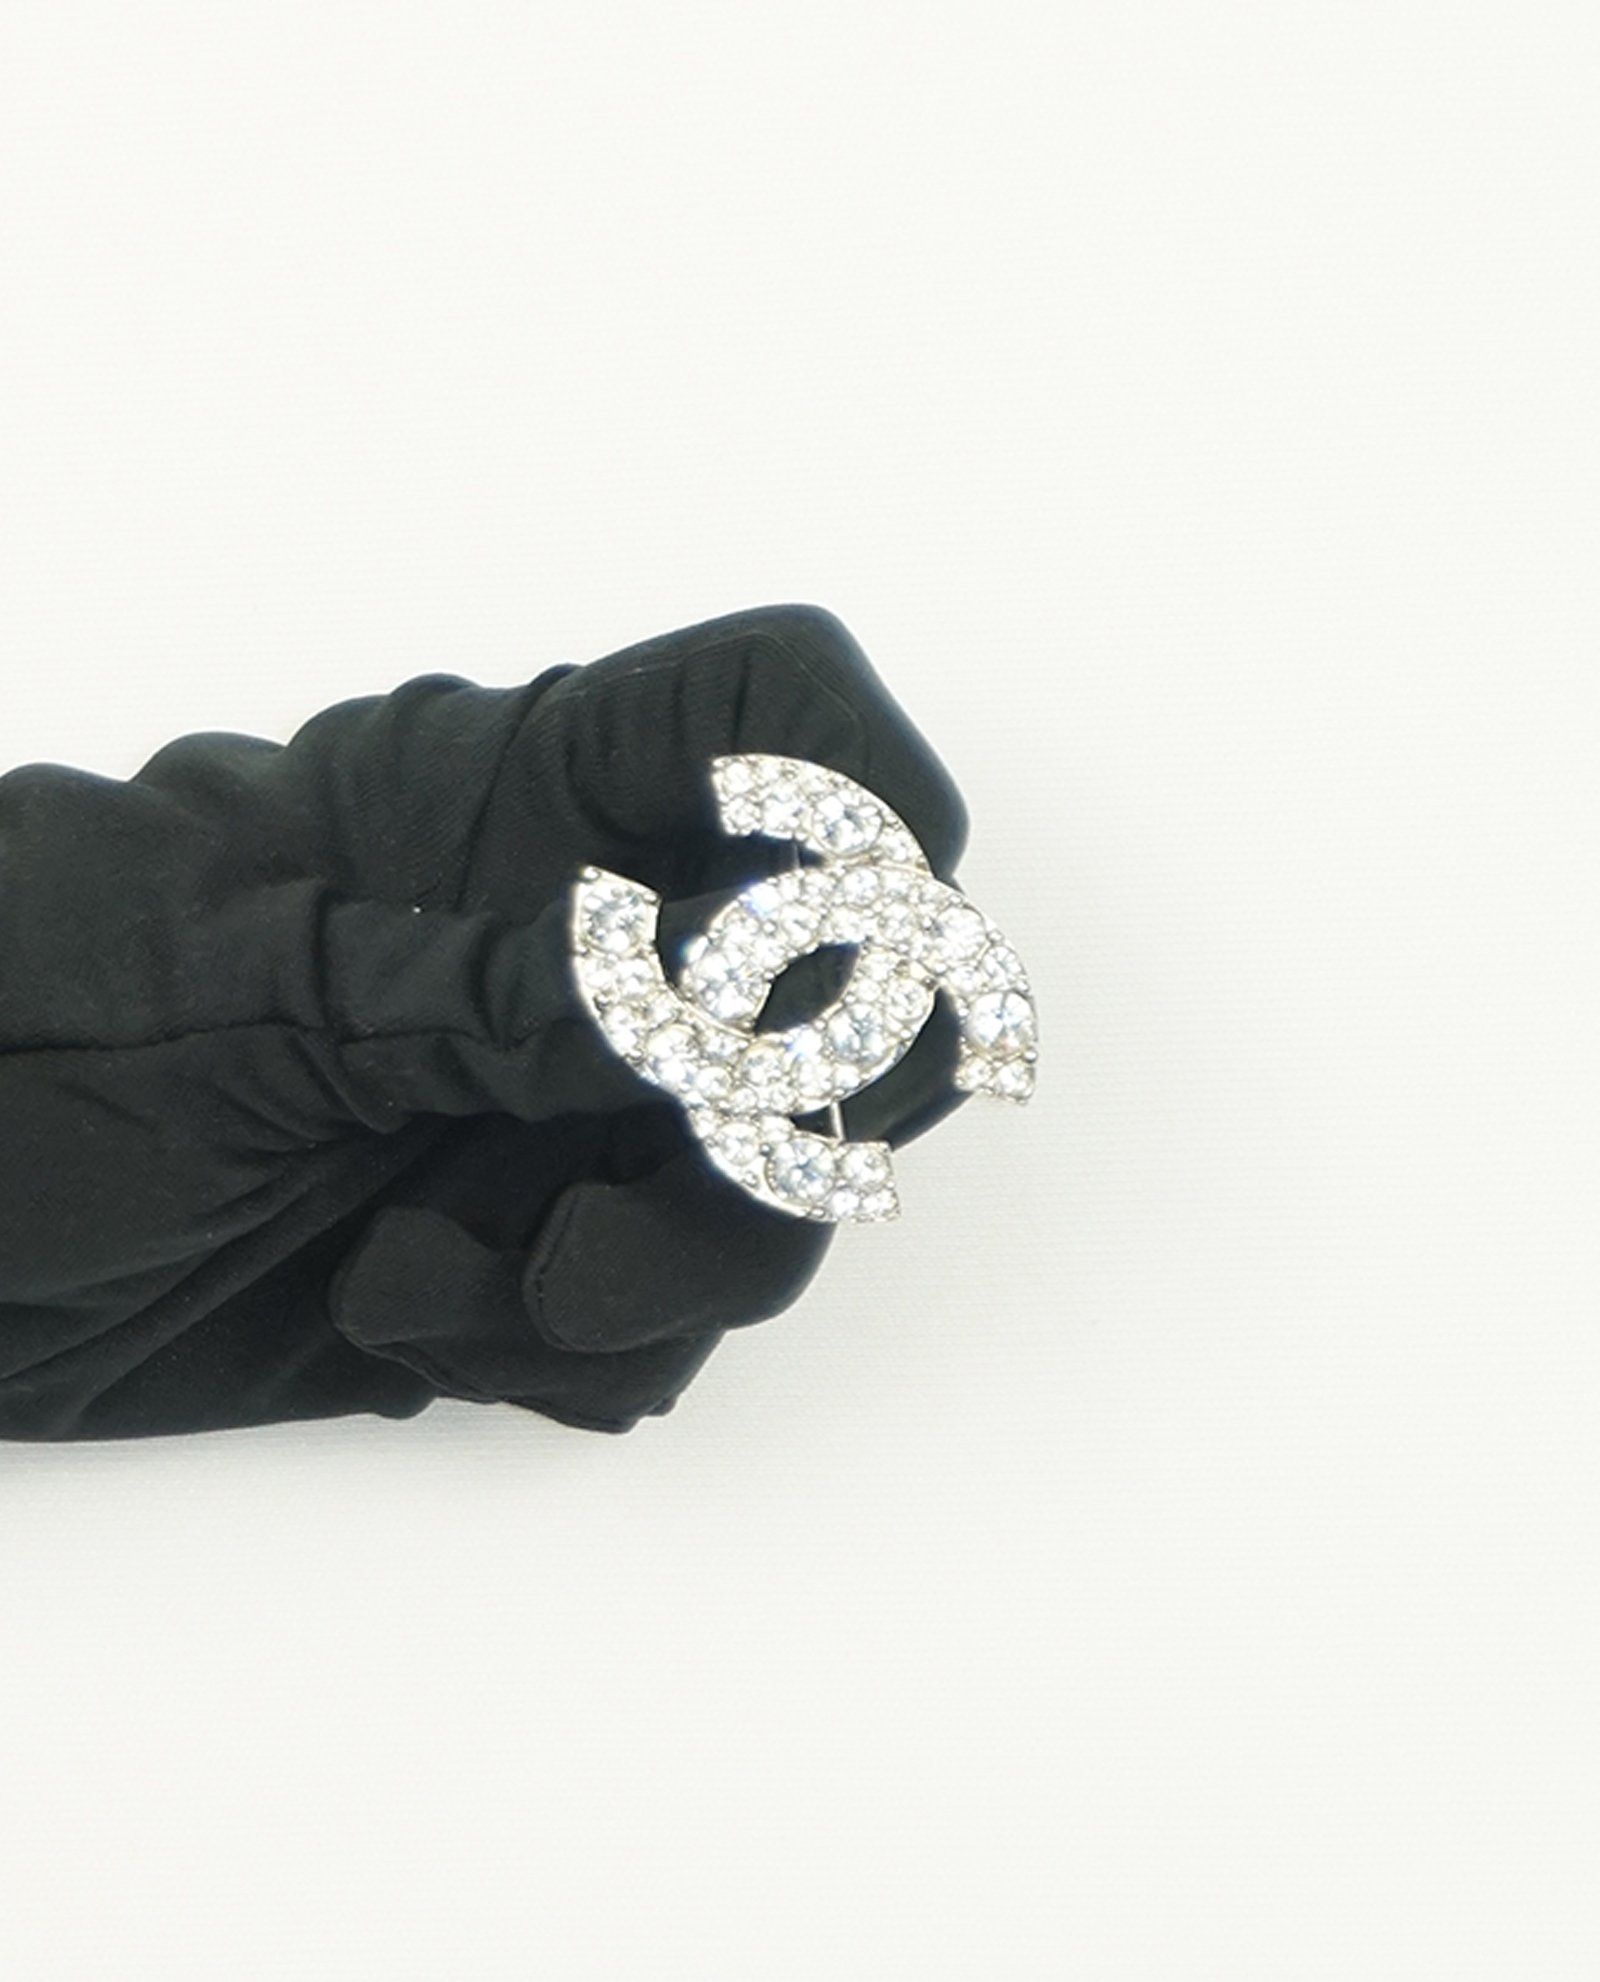 chanel brooch pins for women